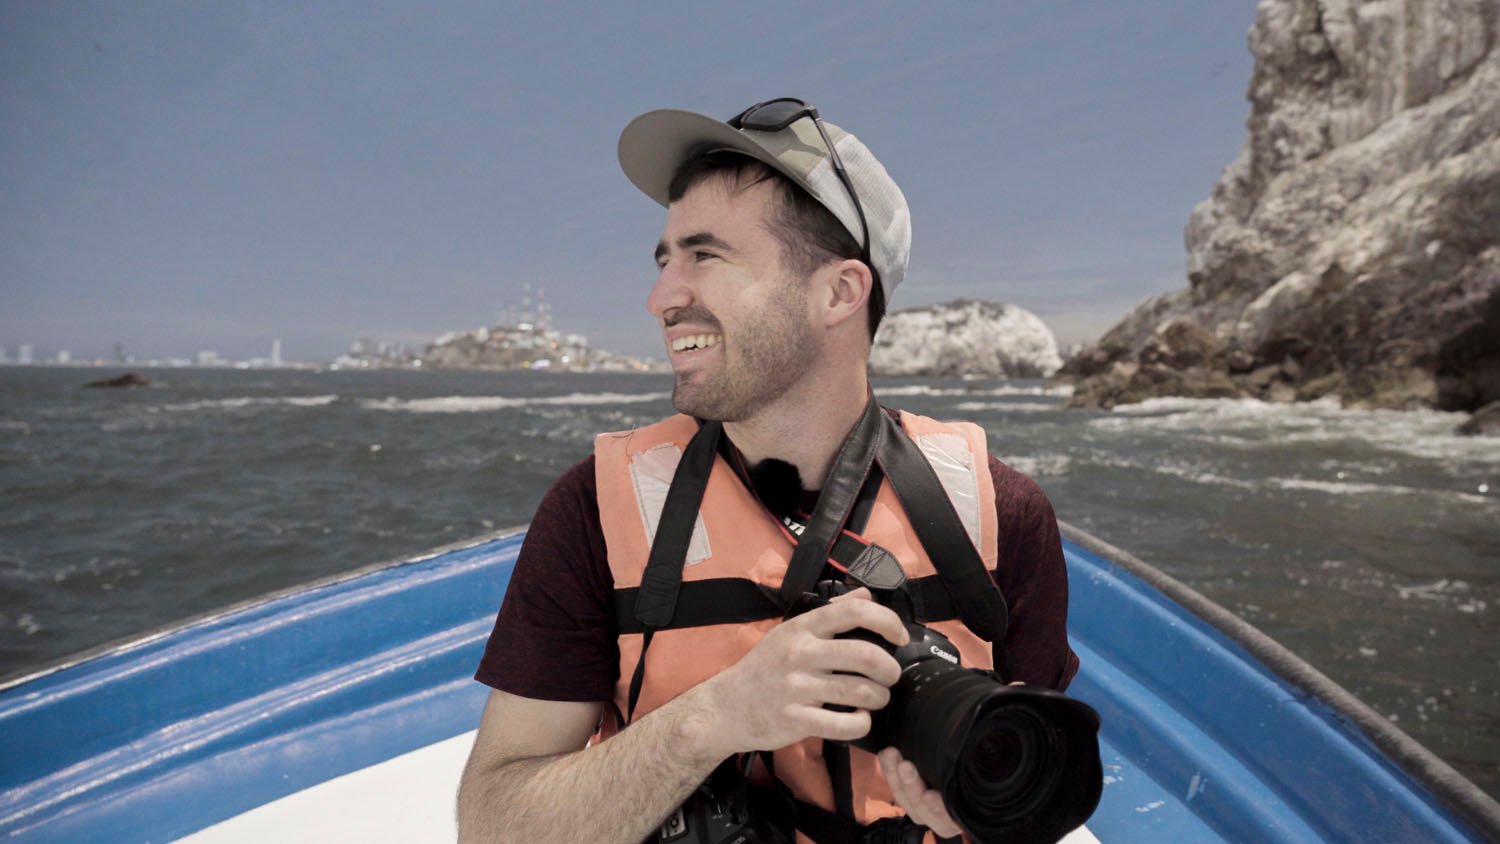 A smiling man wearing a life jacket and hat sits on a boat holding a camera with a rocky shoreline and water in the background.